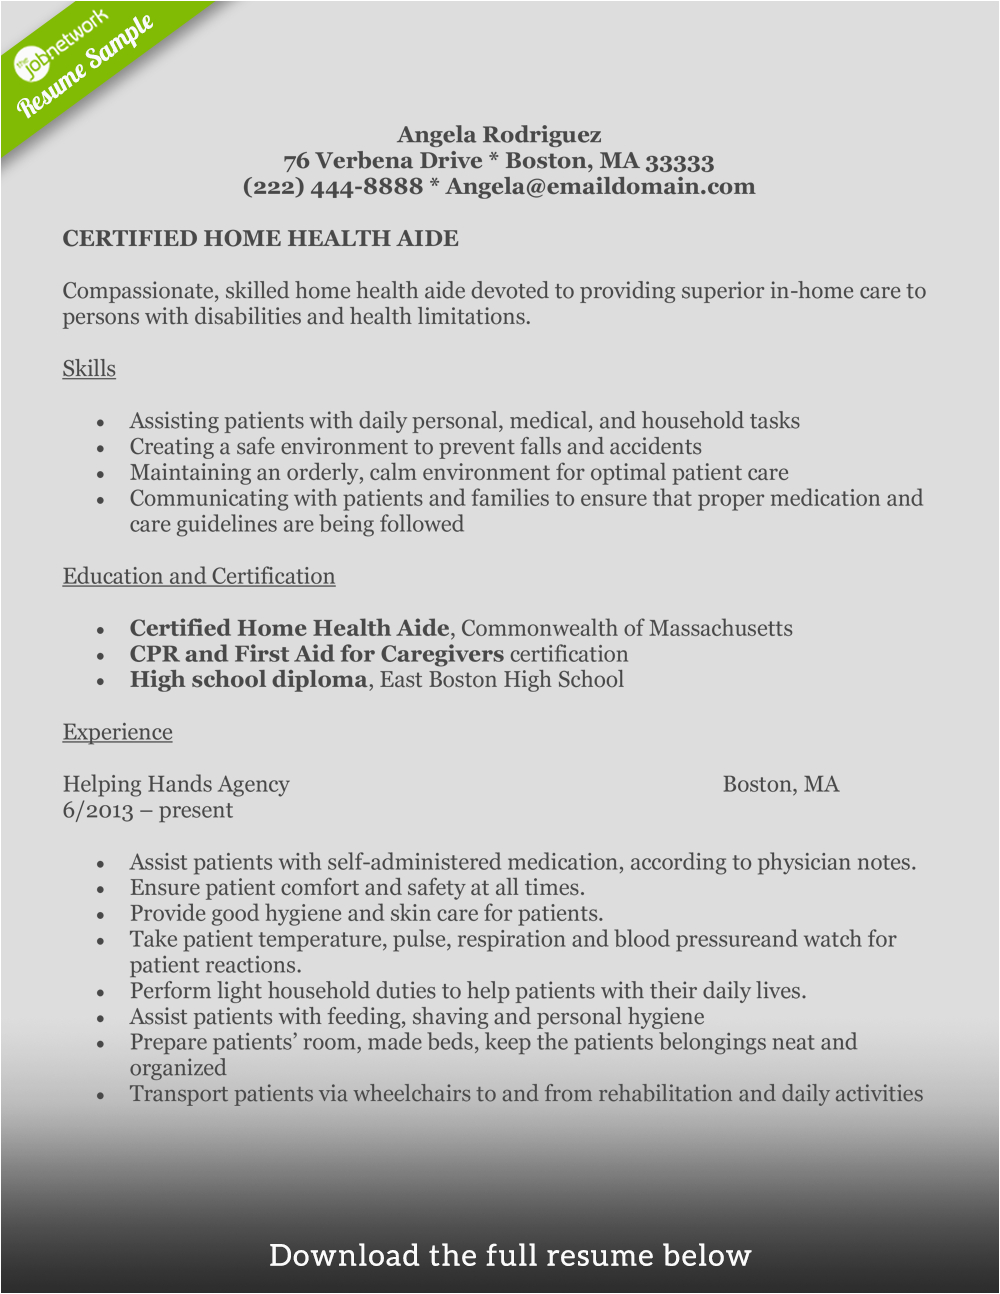 Home Health Aide Resume Objective Samples How to Write A Perfect Home Health Aide Resume Examples